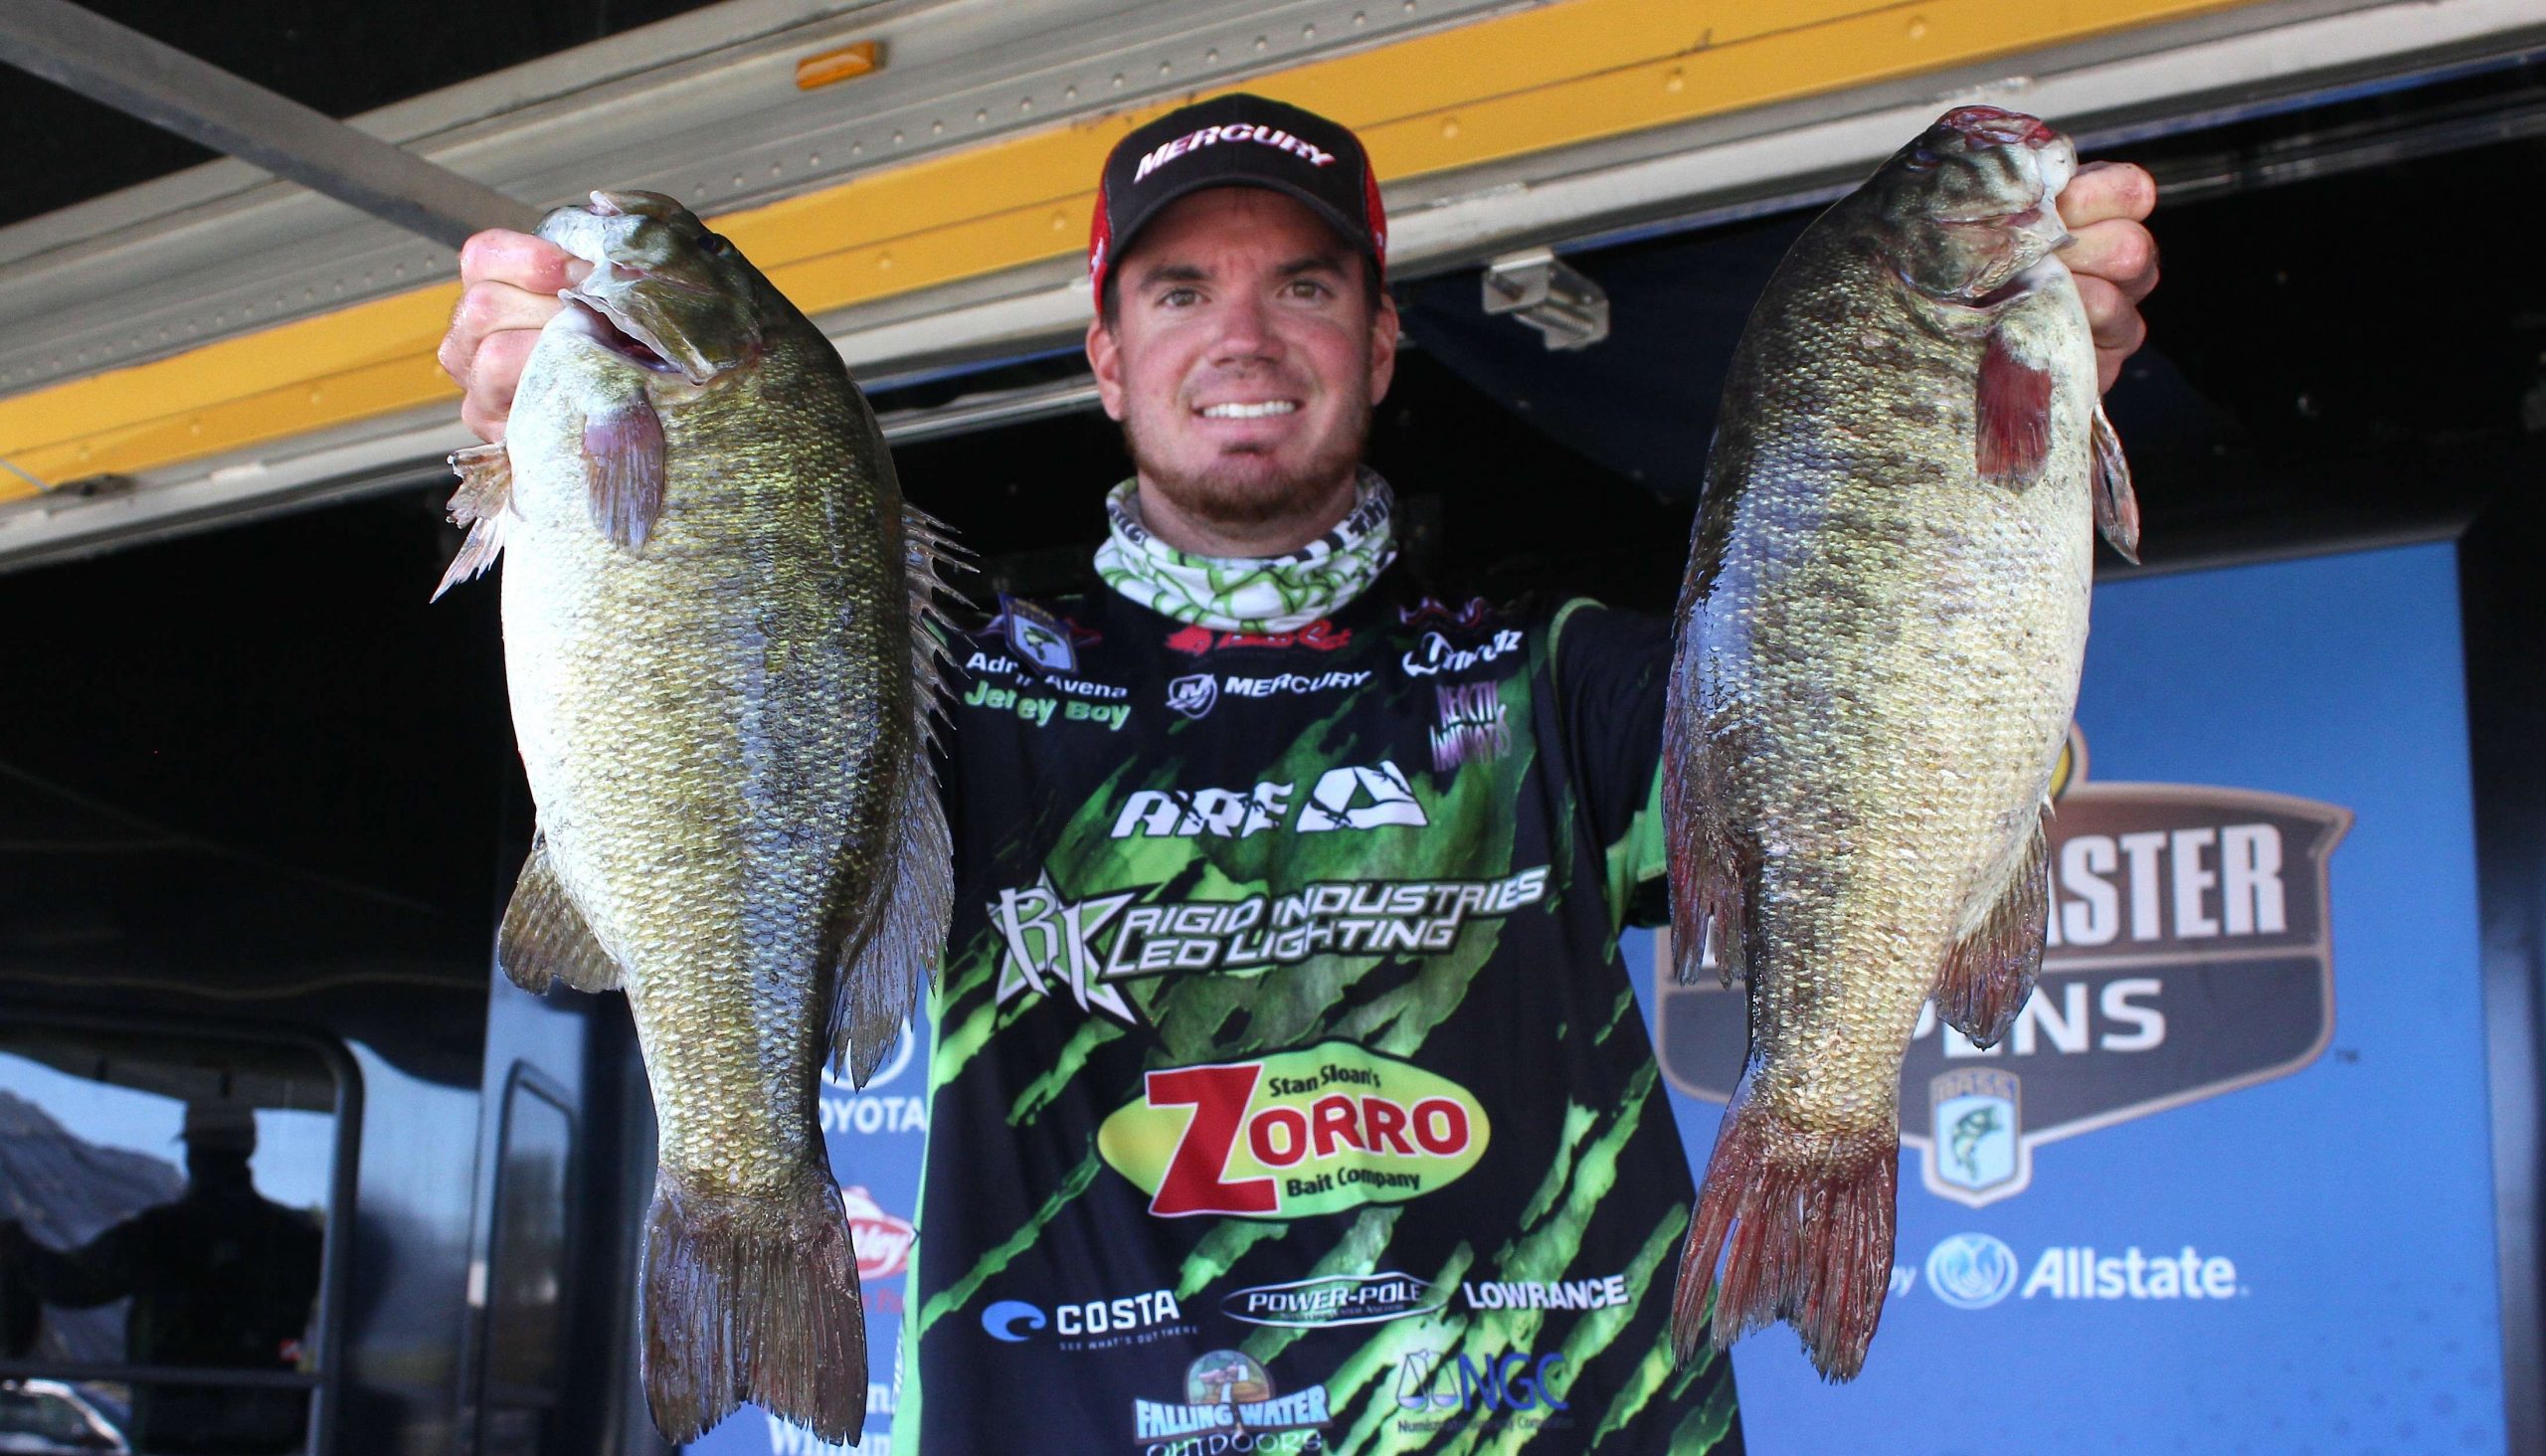 Adrian Avena was languishing in 50th place and needing a good finish here to make his first AOY Championship. With a 29th place standing in the Plano Bassmaster Elite at the Mississippi River presented by Favorite Fishing he now sits in 45th place in the AOY standings. 